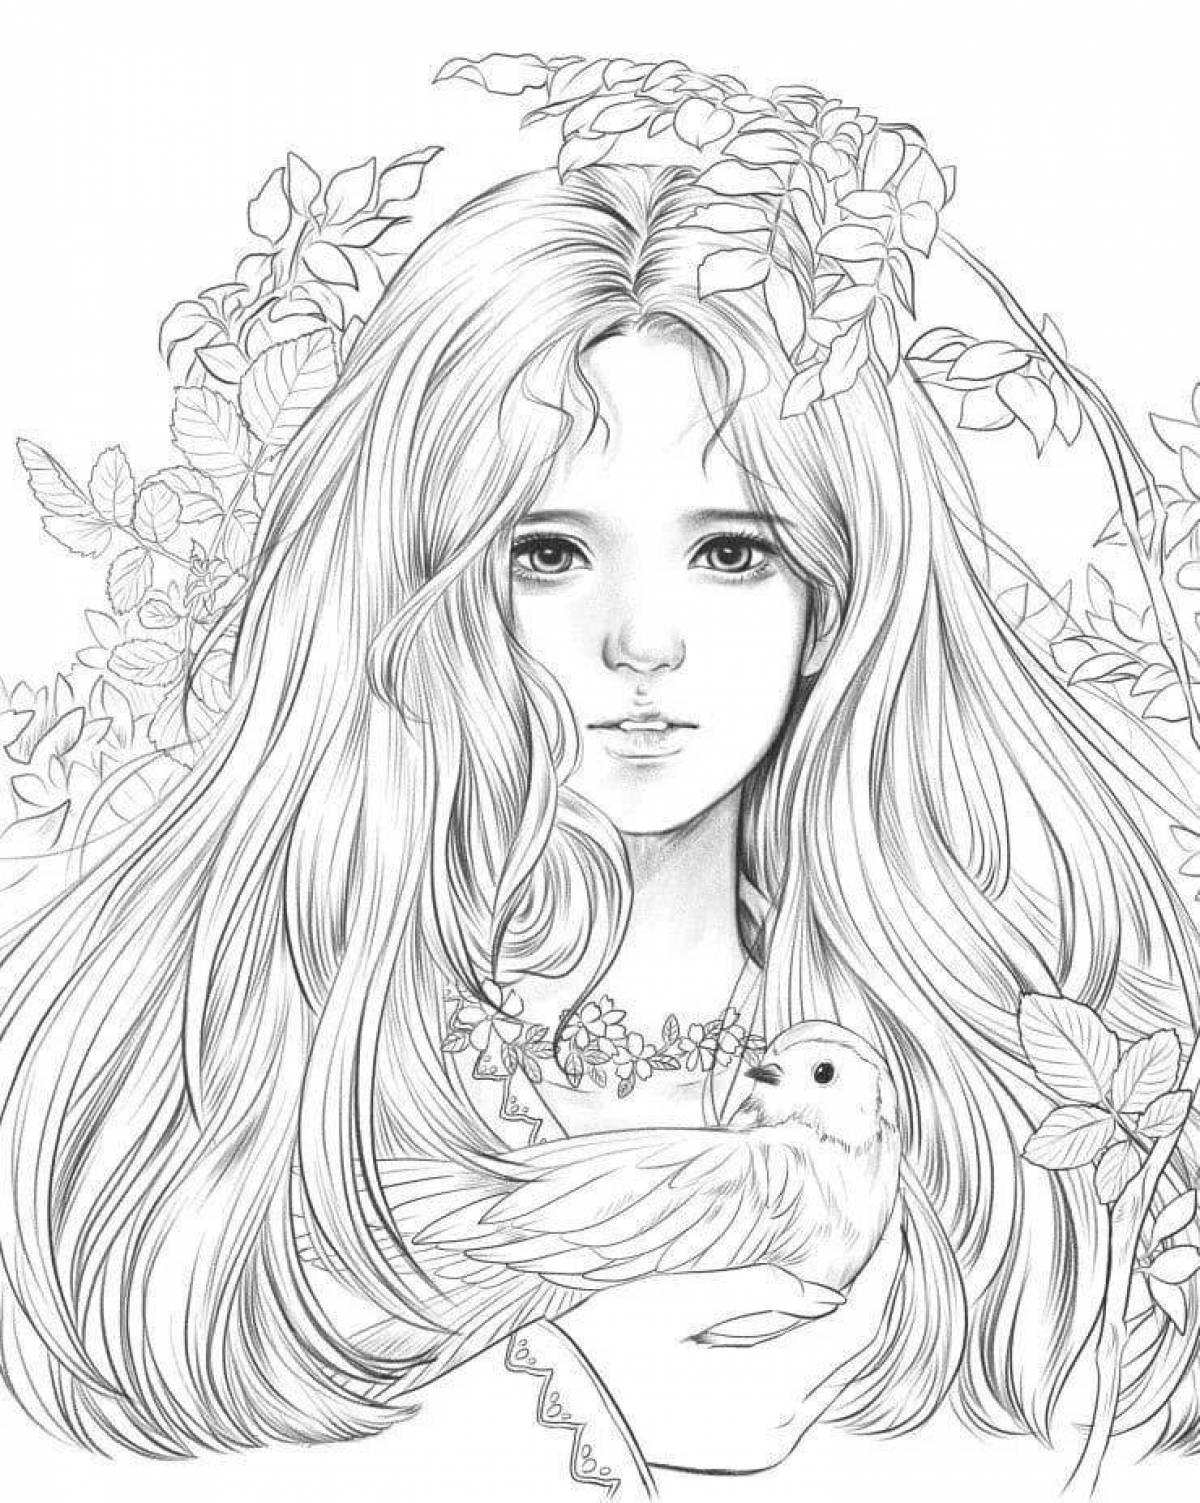 Radiant coloring page girls 18 years old beautiful